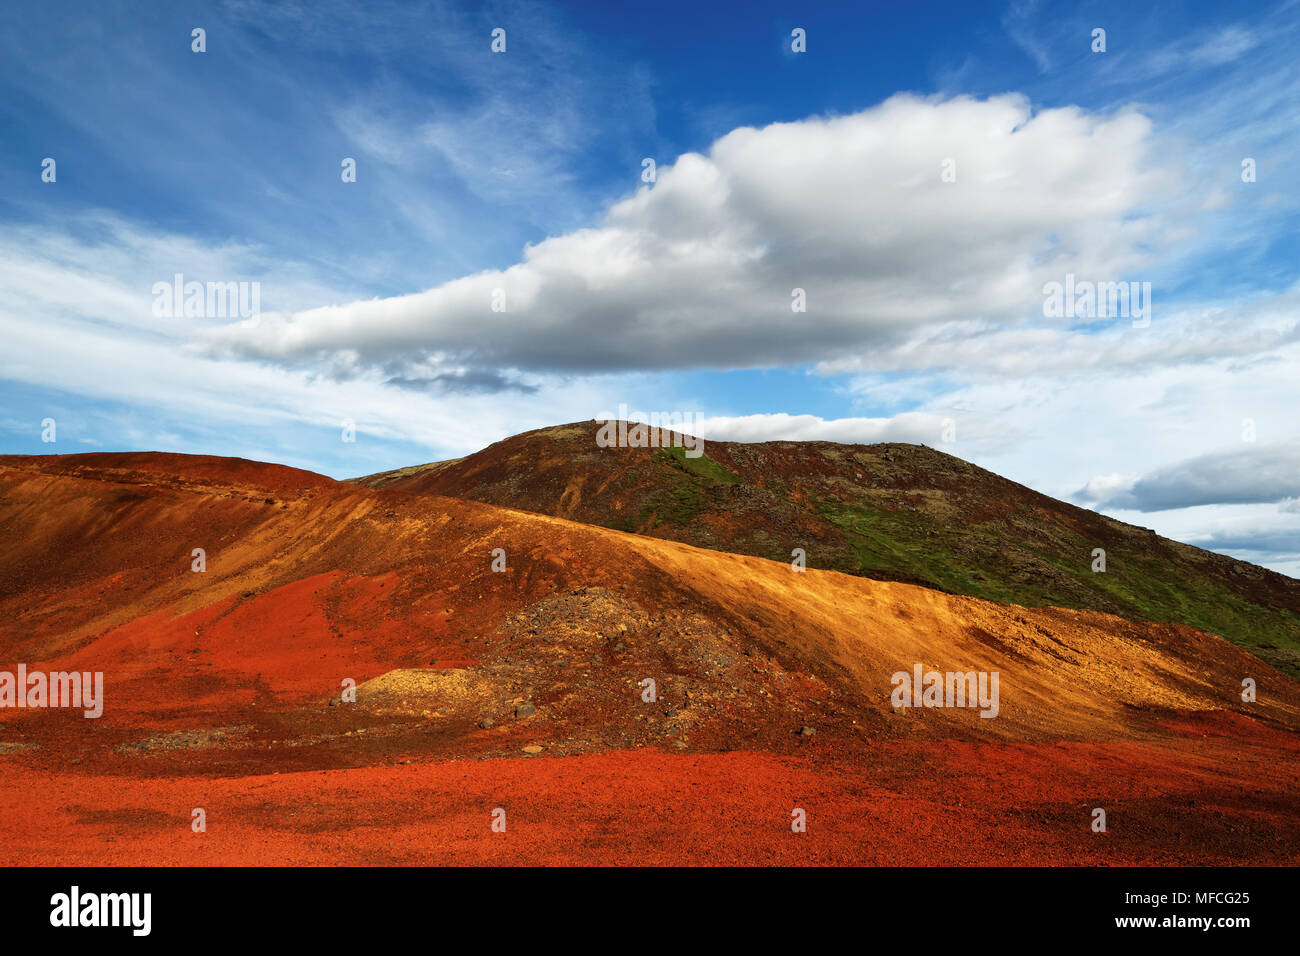 Colorful deposits of volcanic ash in reds and yellows against a green hill, above blue sky with a striking cloud formation - Location: Iceland, Golden Stock Photo